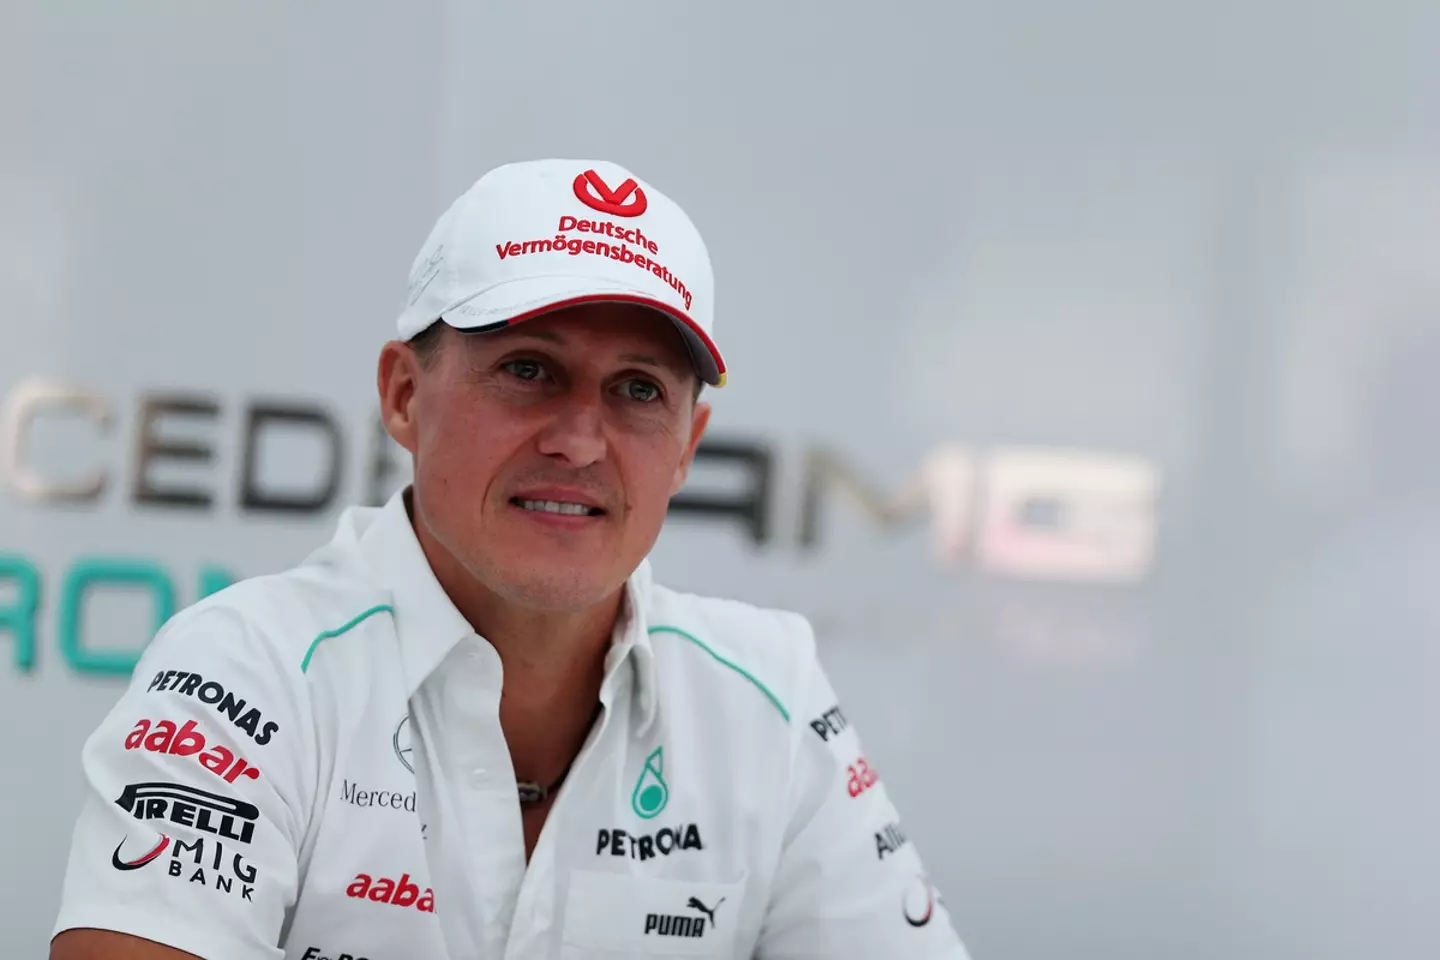 10 years on from his accident details about Michael Schumacher's condition have been sparse.